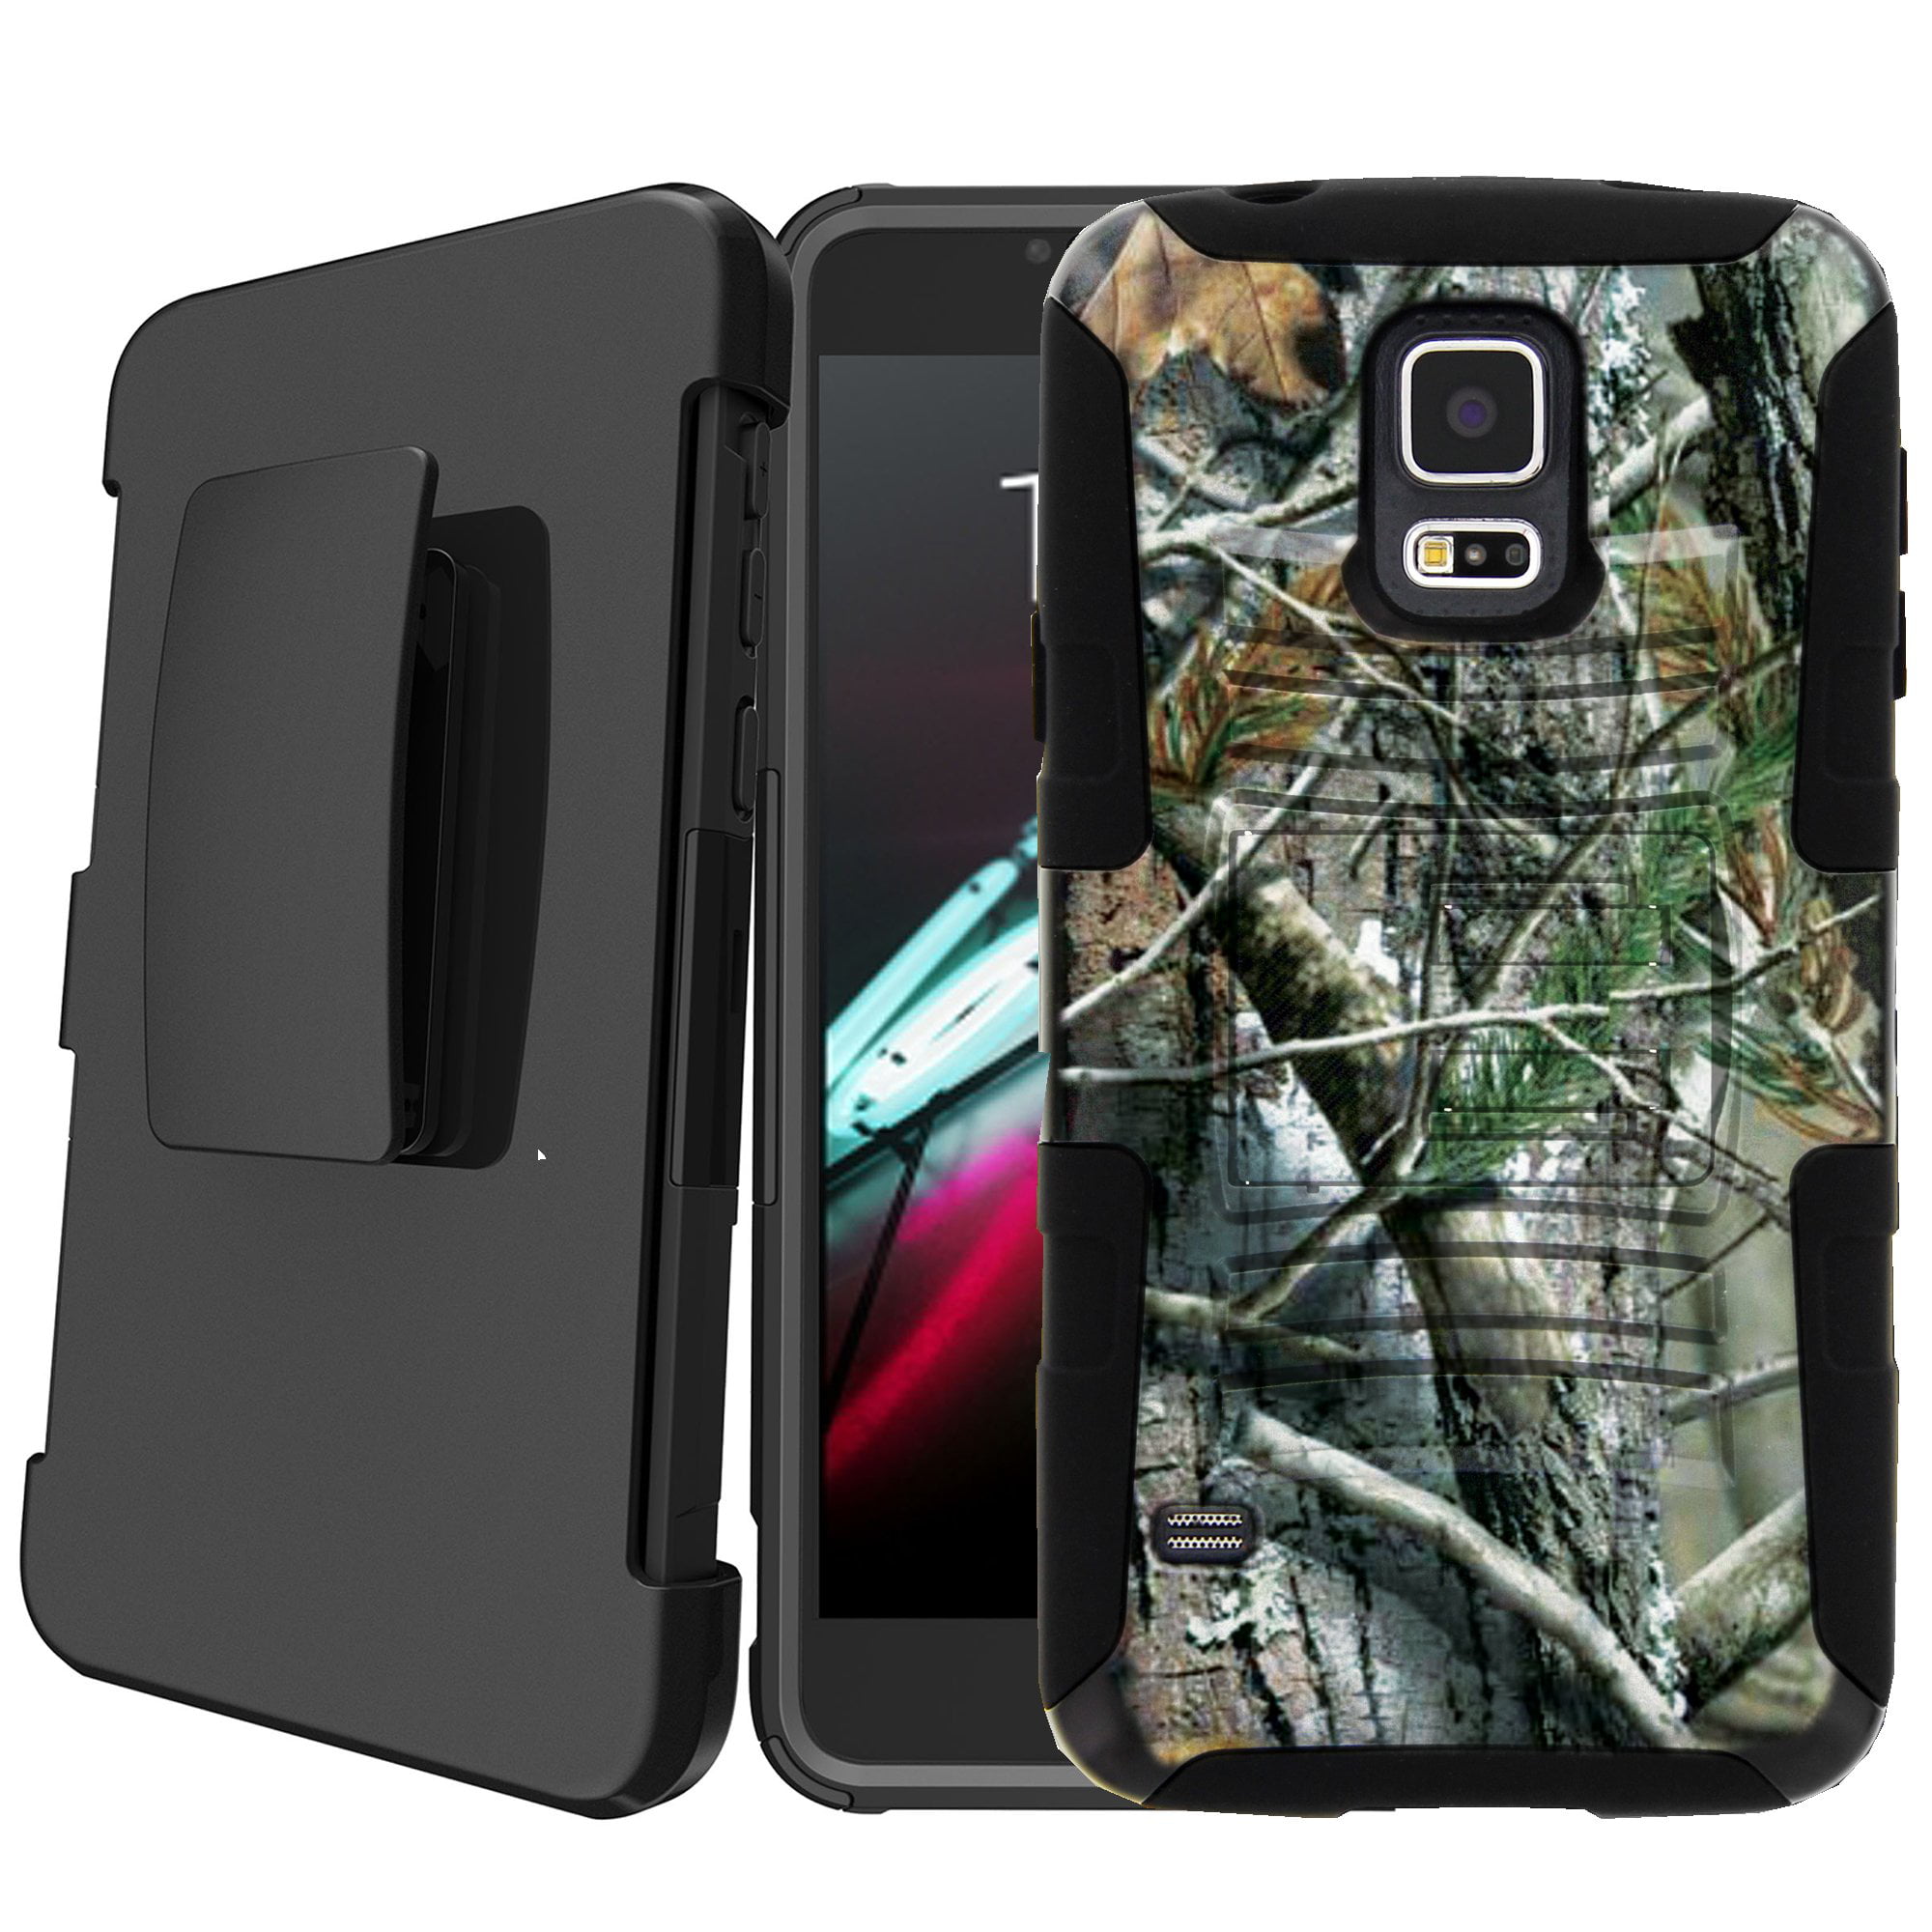 Samsung Galaxy S5 I9600 Holster Case [ Case for Boys][Cool Phone Case